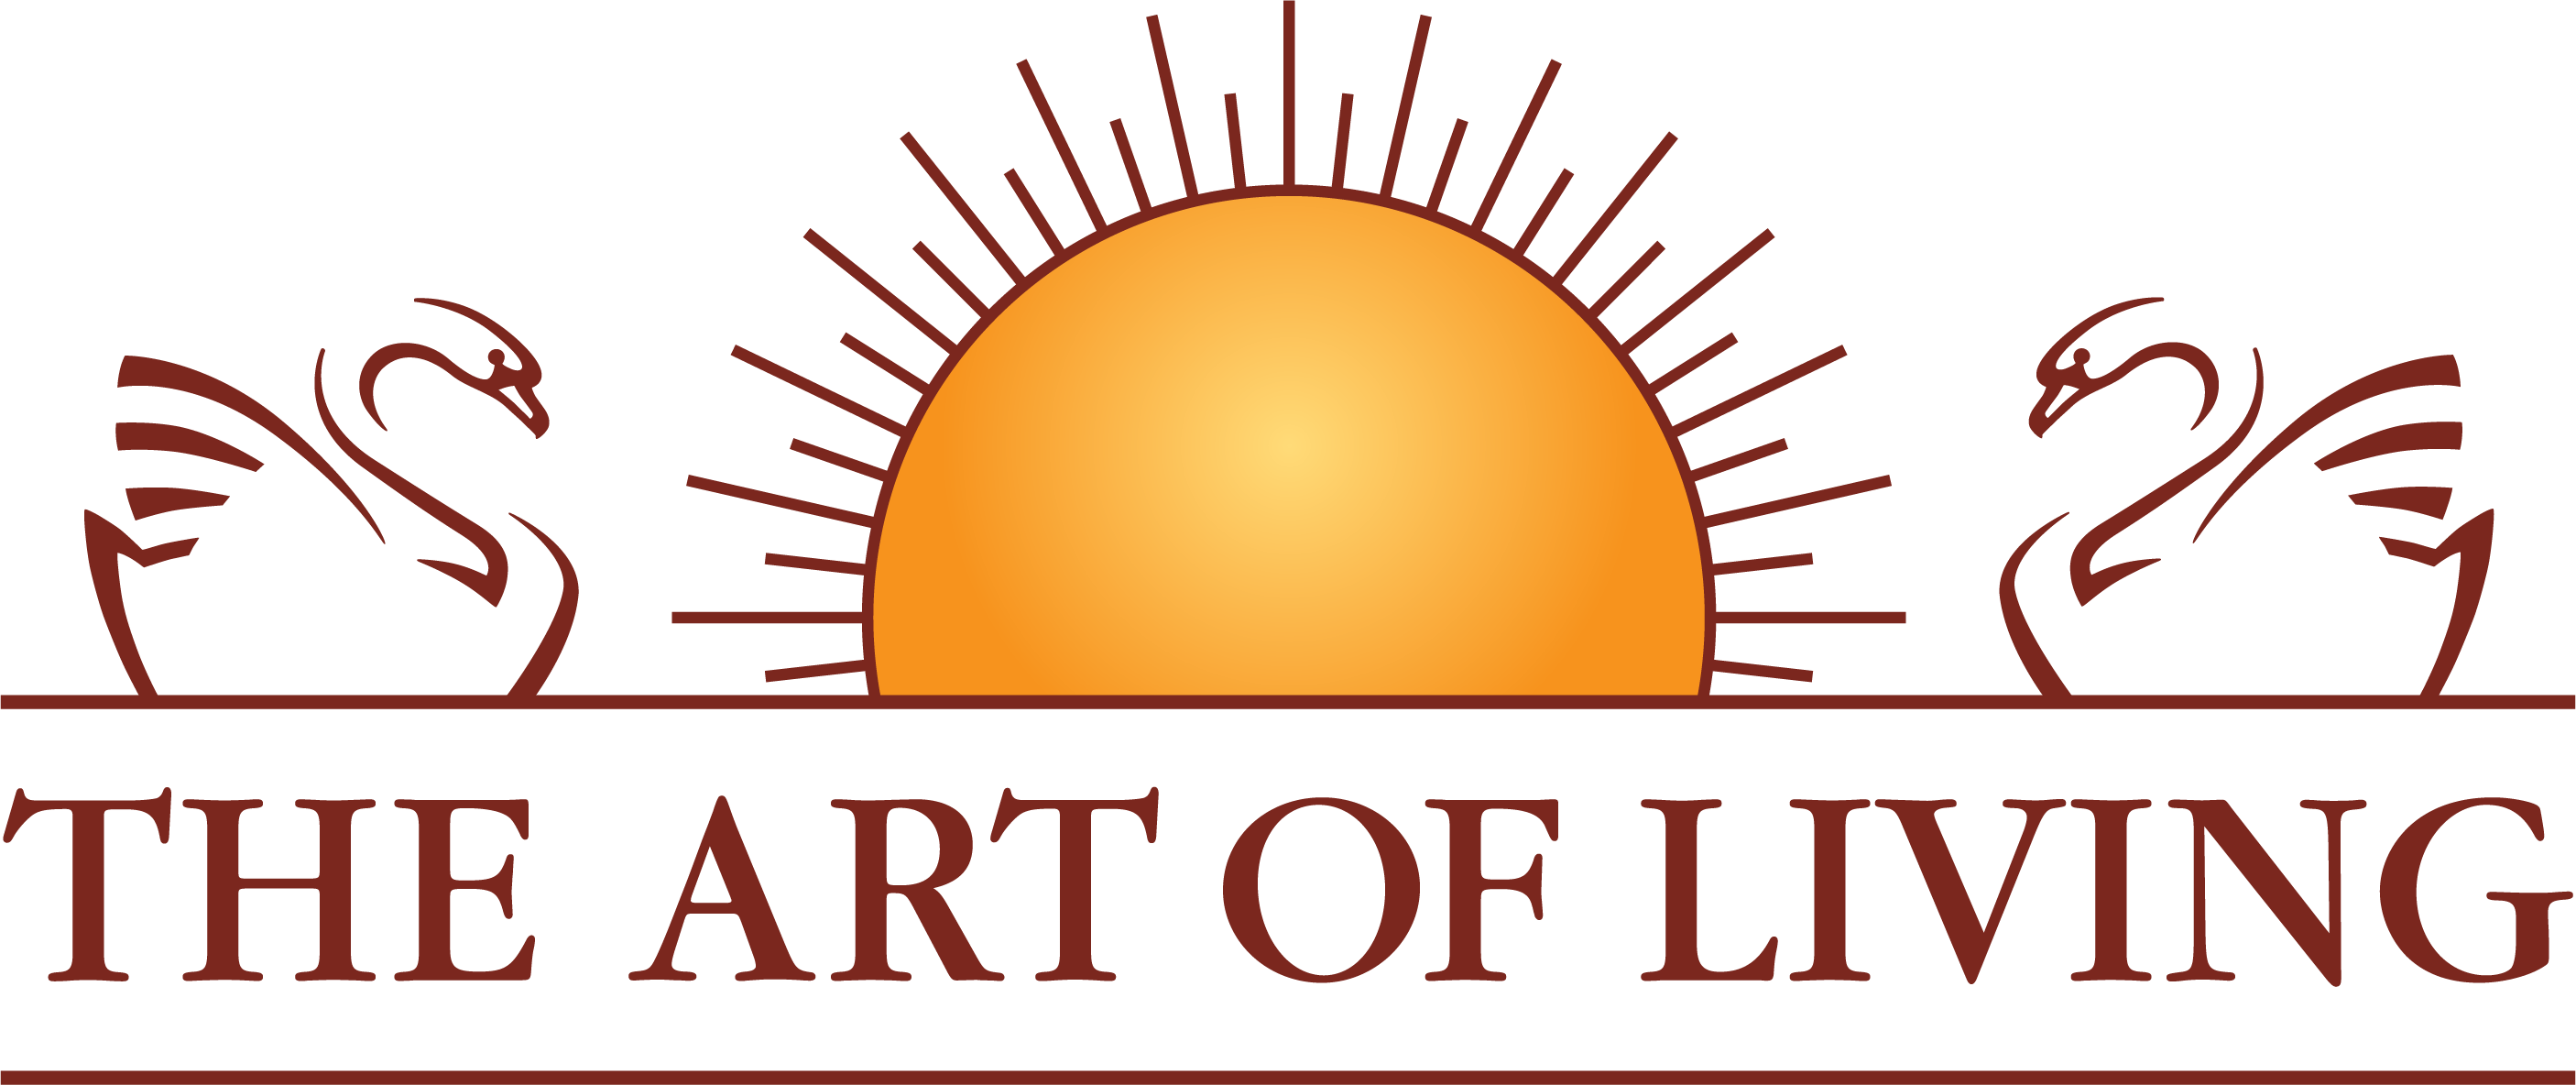 The Art of Living Foundation